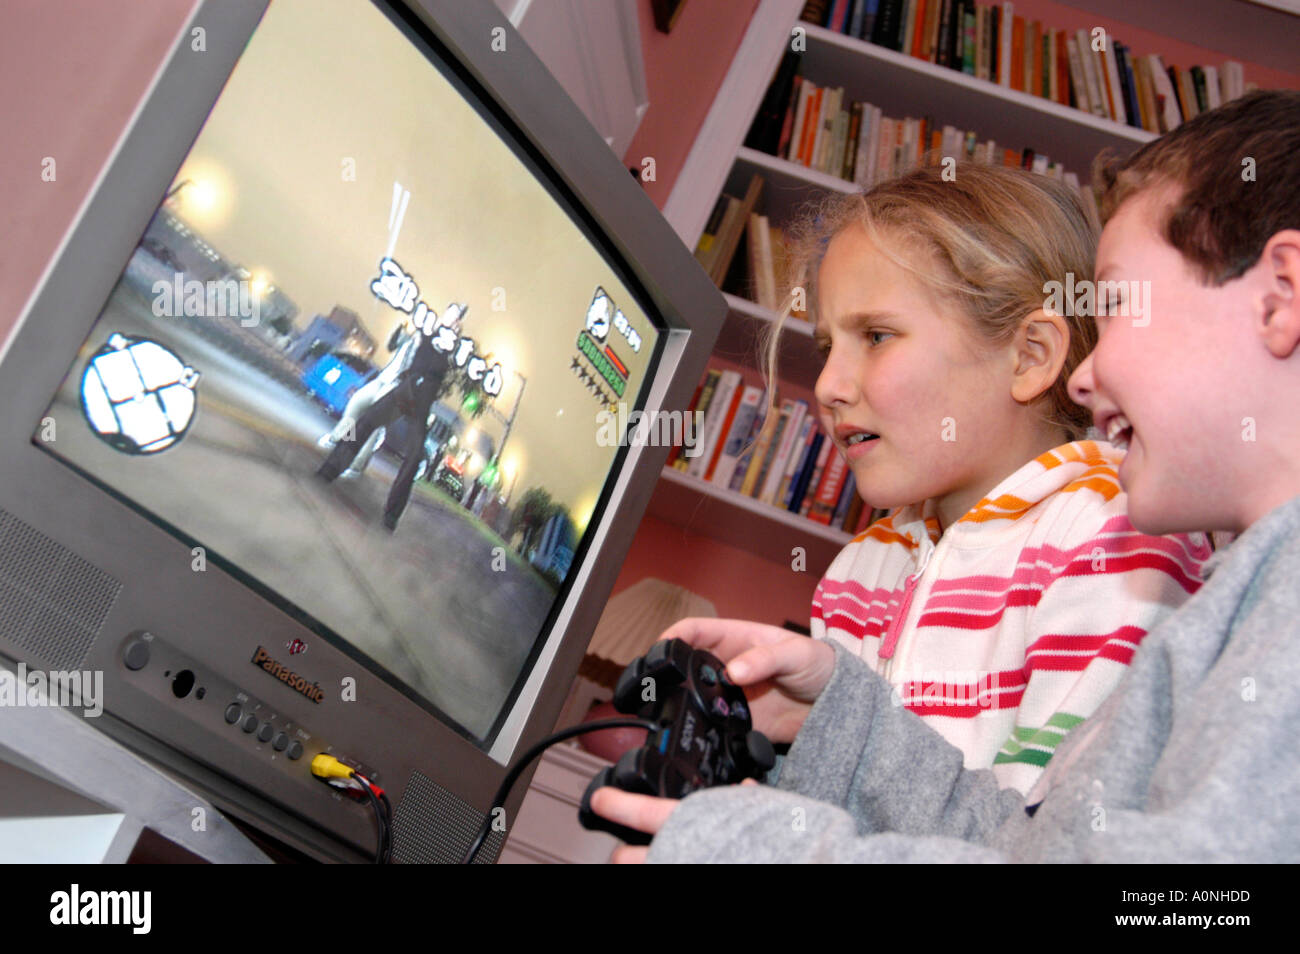 Children playing violent 18 certificate rated computer game Grand Theft  Auto on Sony Playstation console, England, UK Stock Photo - Alamy